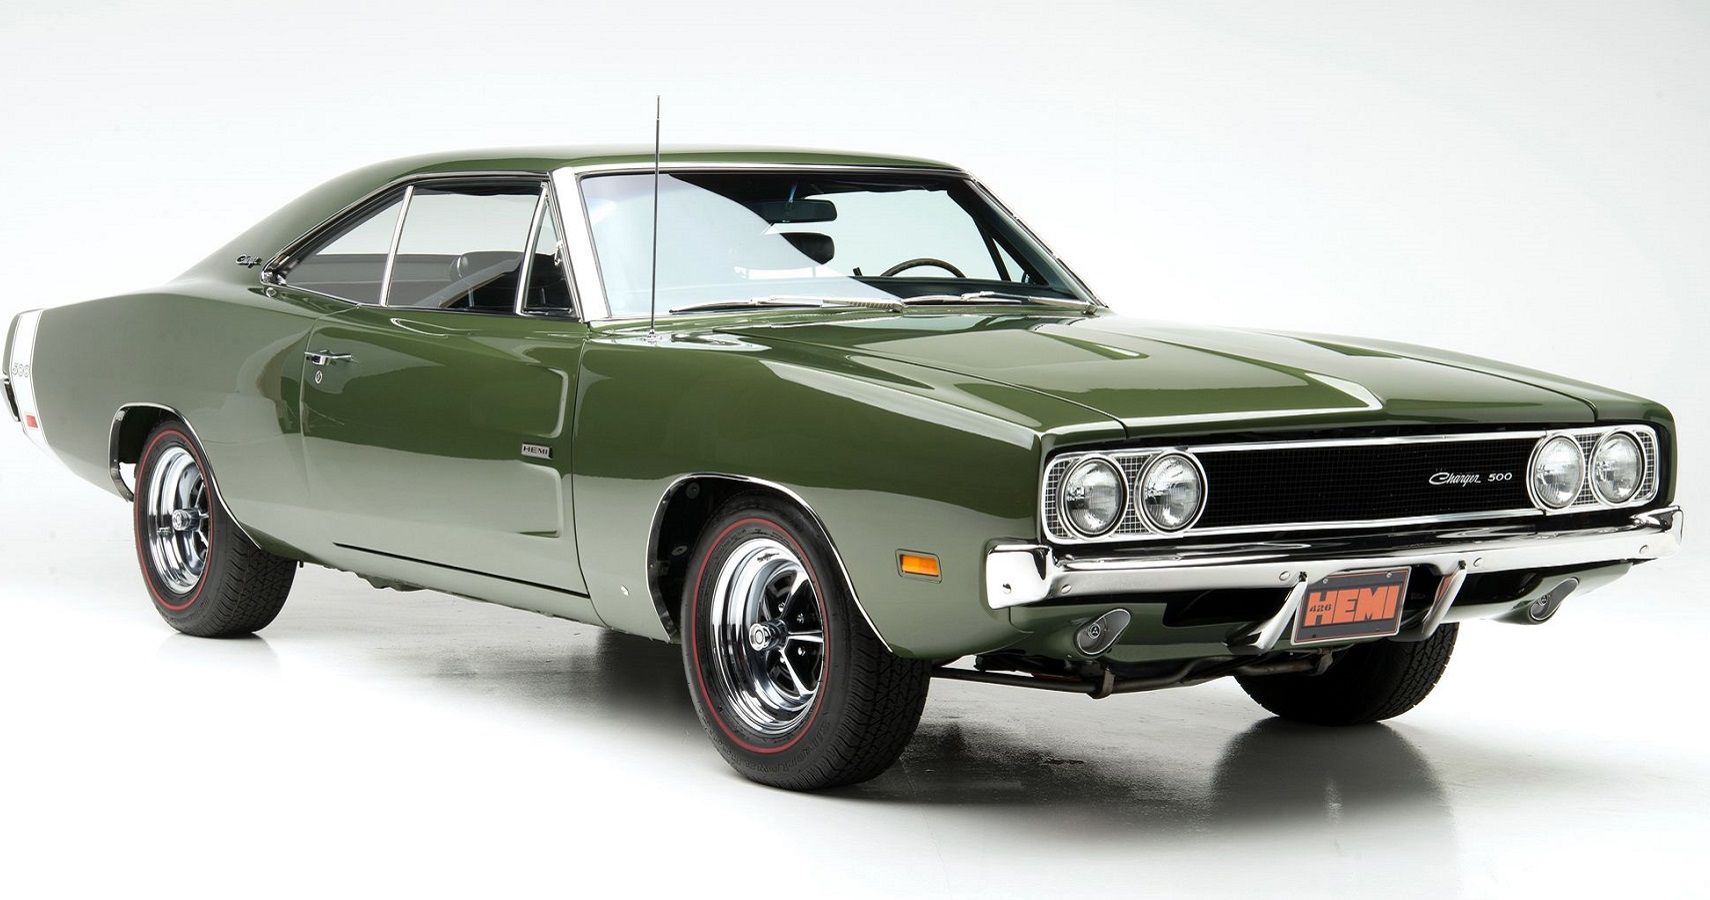 Check out this 1969 limited edition Dodge Charger 500 with a hemi-engine and NASCAR caliber aerodynamics